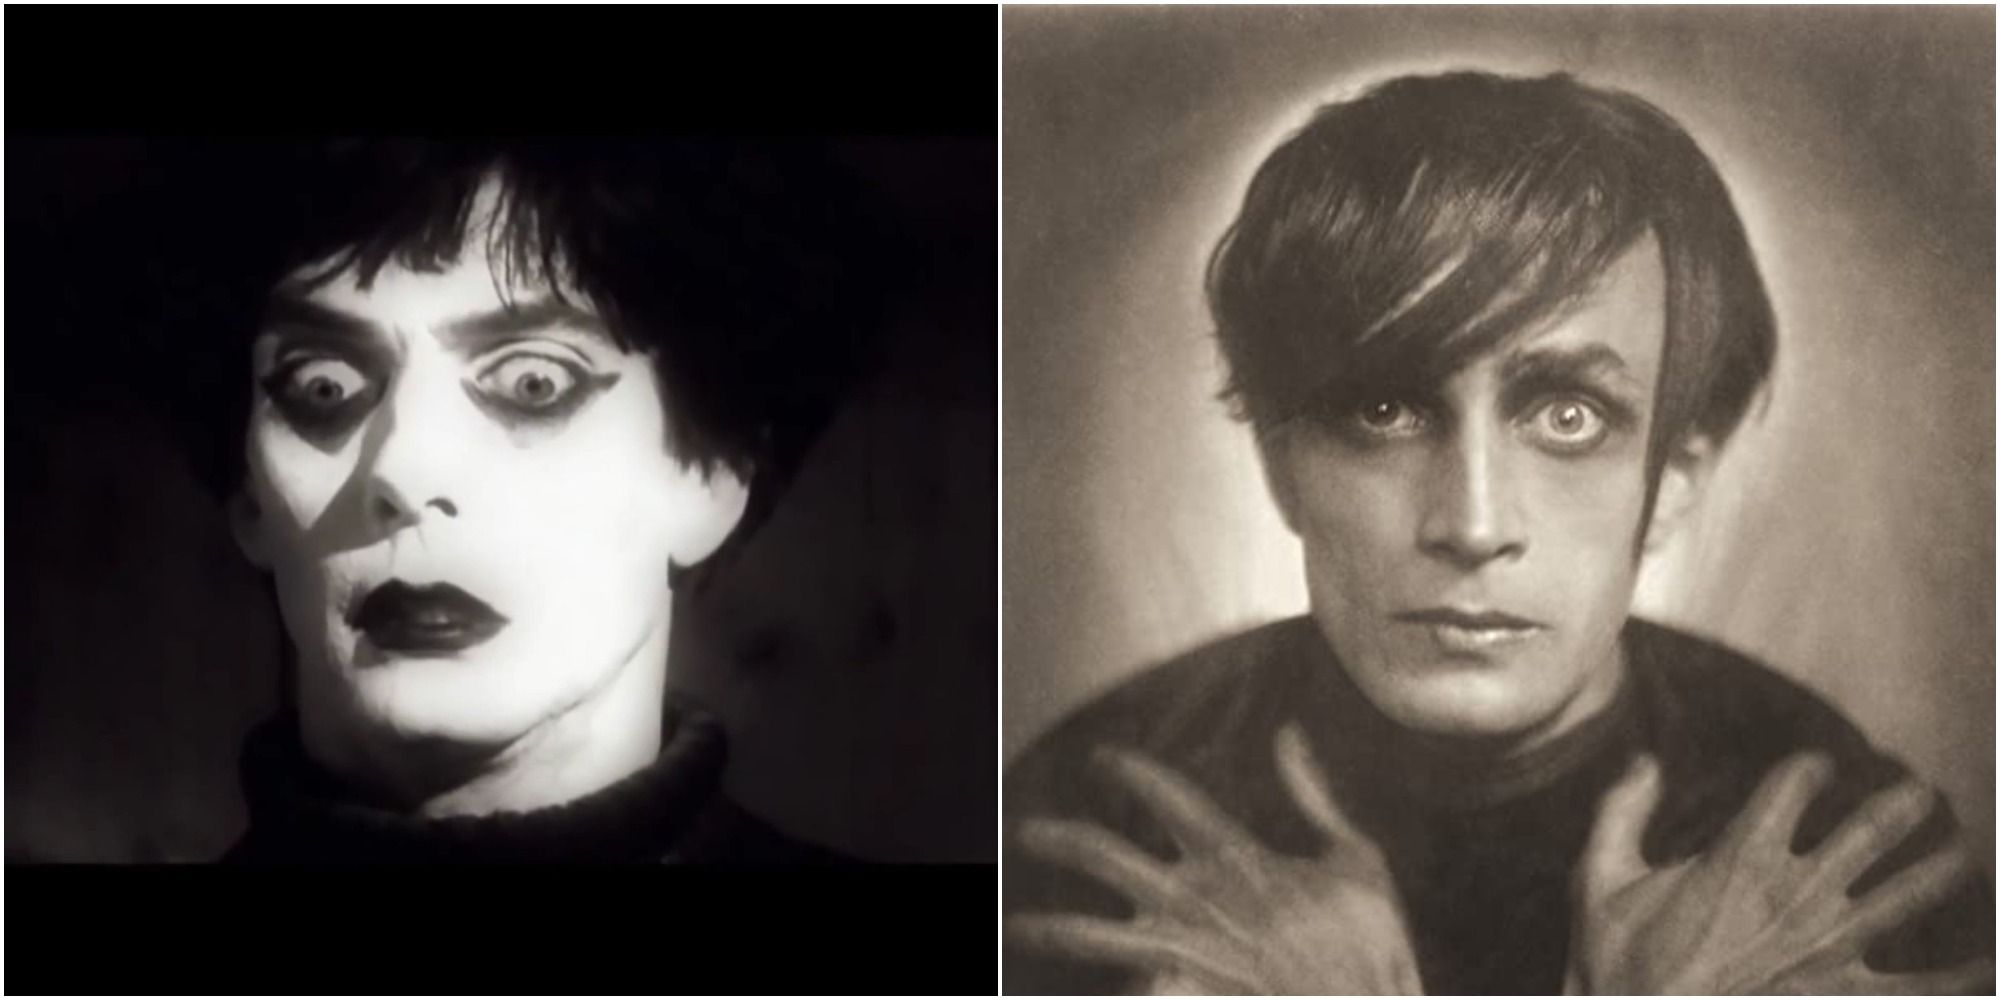 Doug Jones and Conrad Veidt as Cesare in The Cabinet of Dr. Caligari, 2005 and 1920